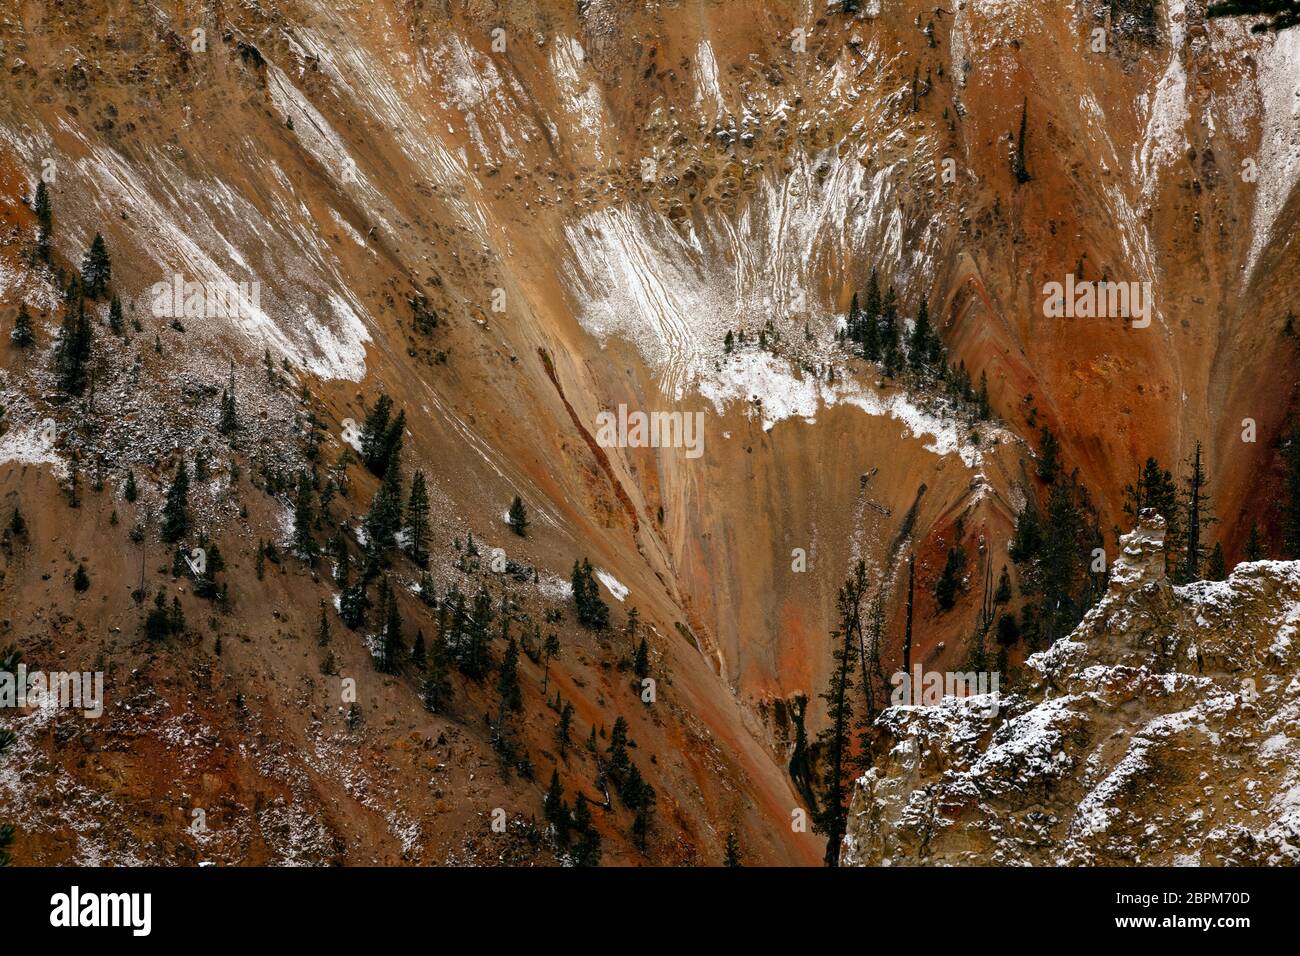 WY04412-00...WYOMING - Snow on the colorful walls of the Grand Canyon of the Yellowstone below Artist Point in Yellowstone National Park. Stock Photo